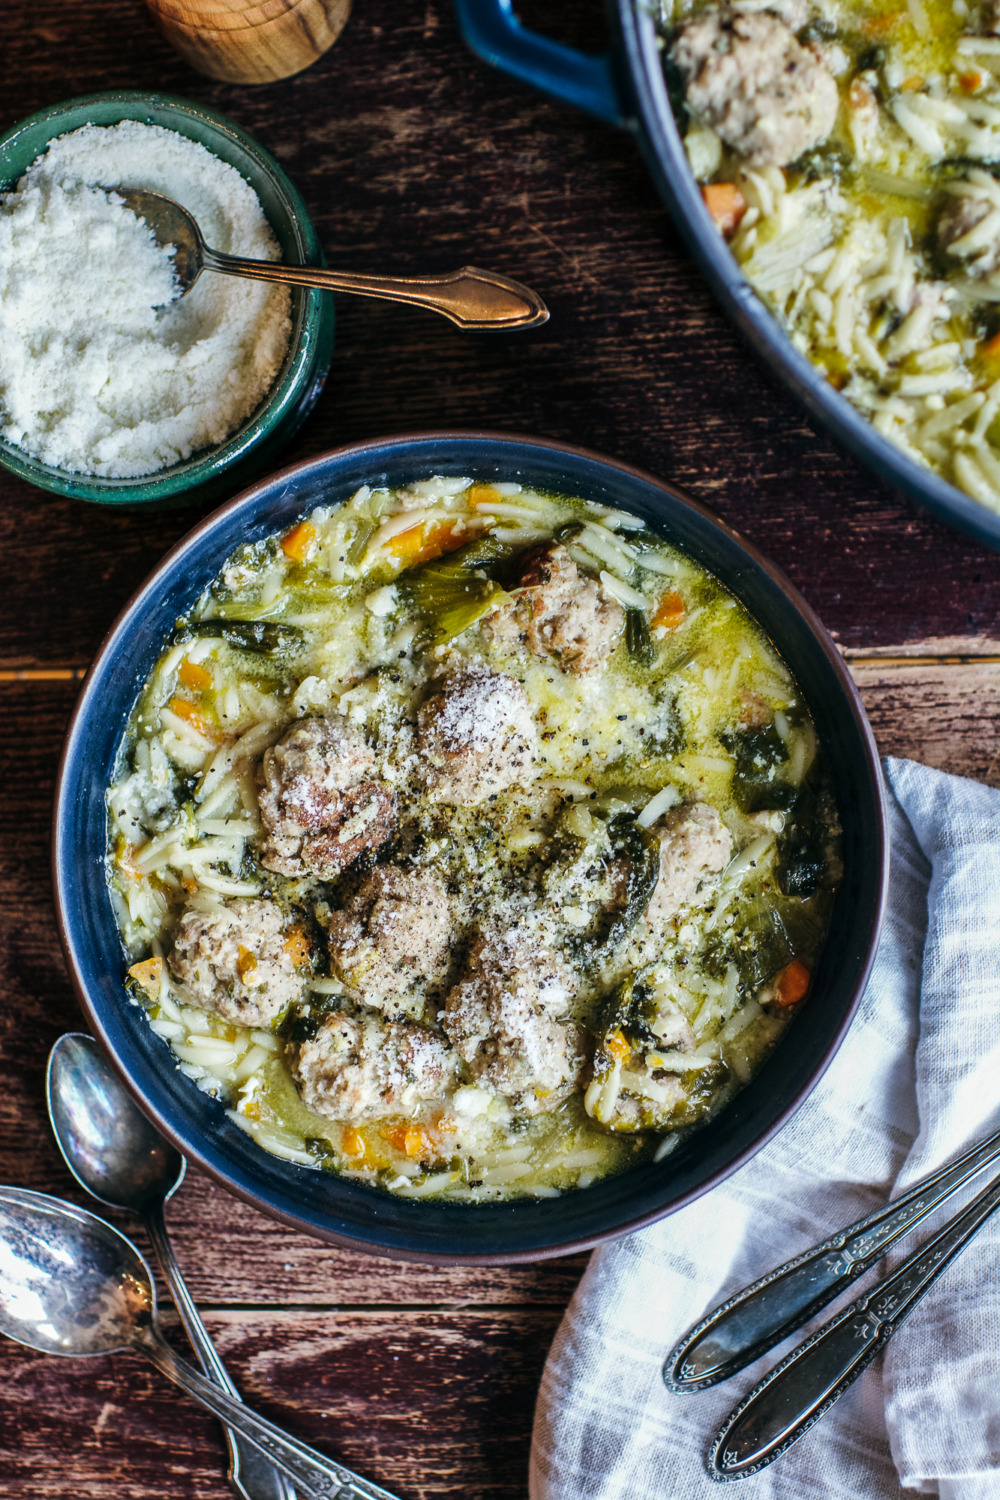 https://ciaochowbambina.com/wp-content/uploads/2022/10/Italian-Wedding-Soup-with-Orzo-1-of-10-1-of-1.jpg